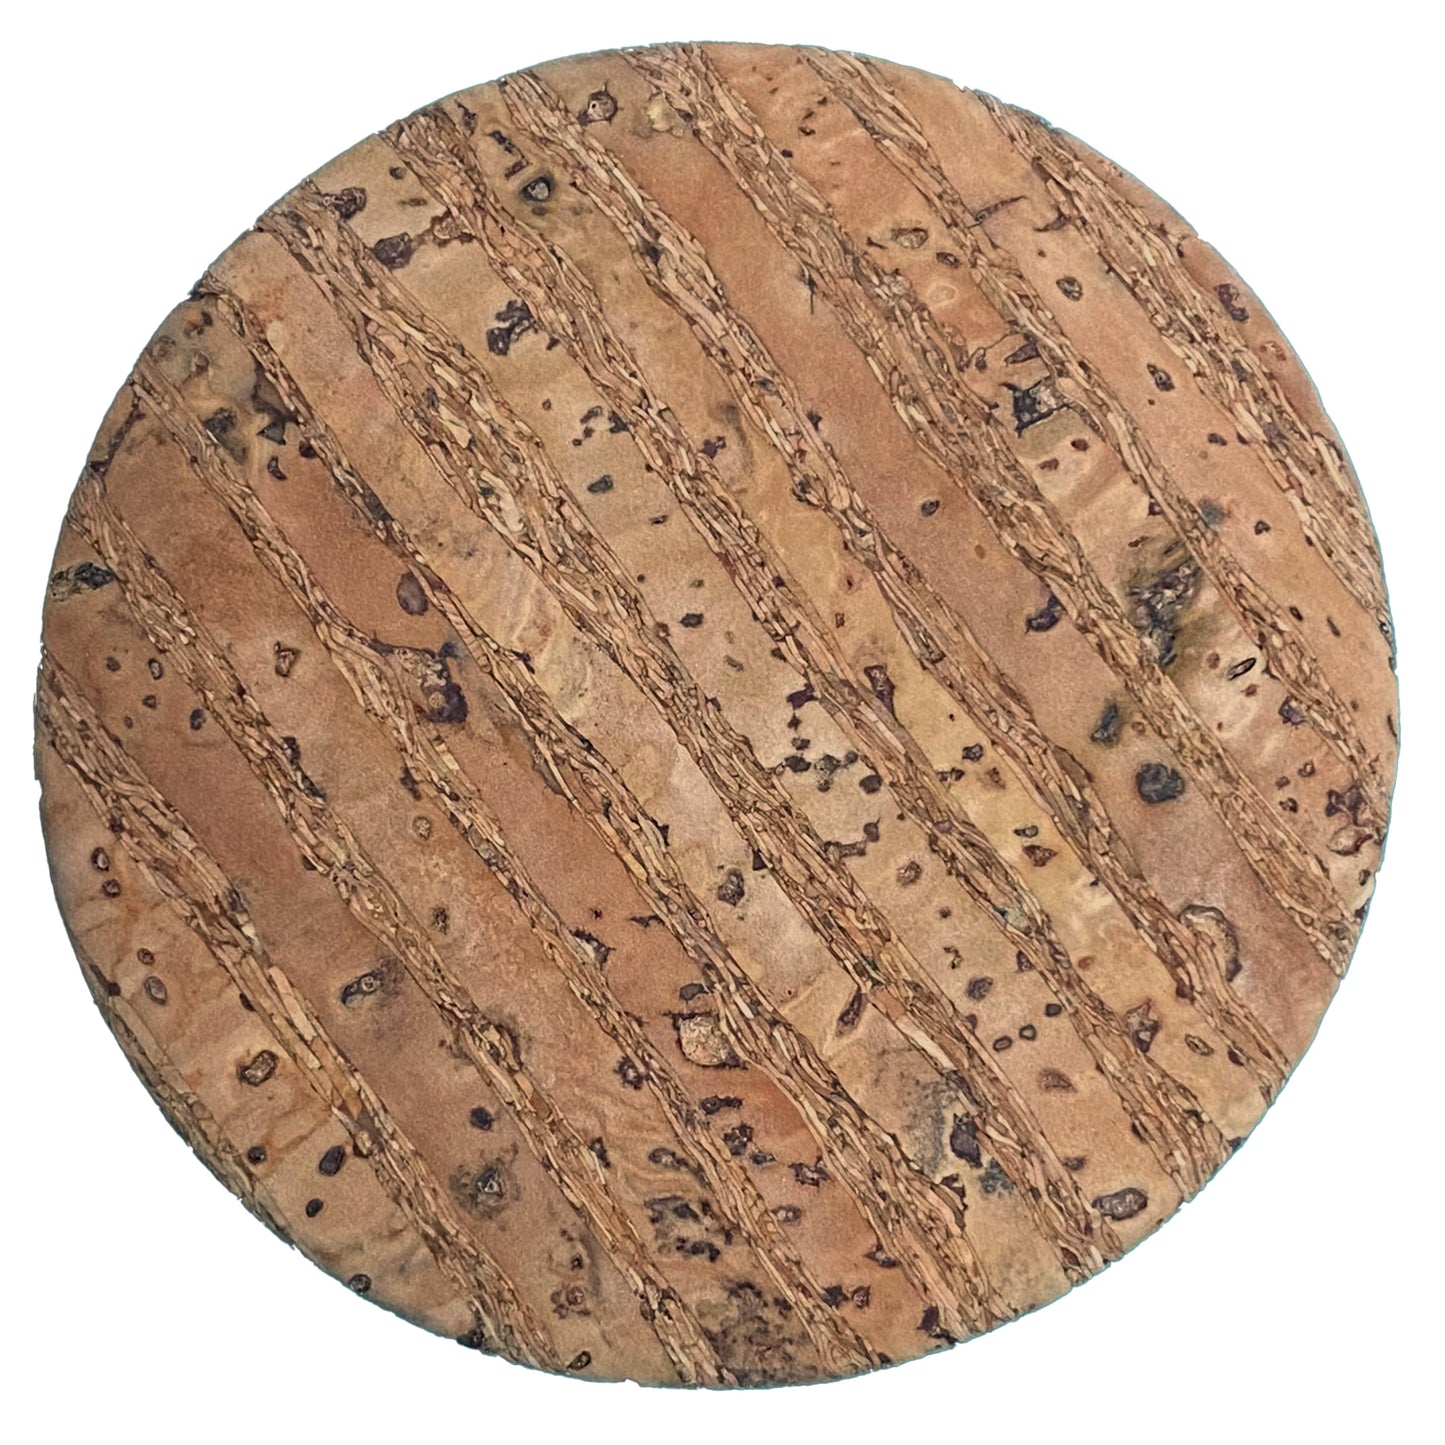 Cork Buttons (Natural 94) - 2 Inch Large - BCB-94L (One Piece Card)